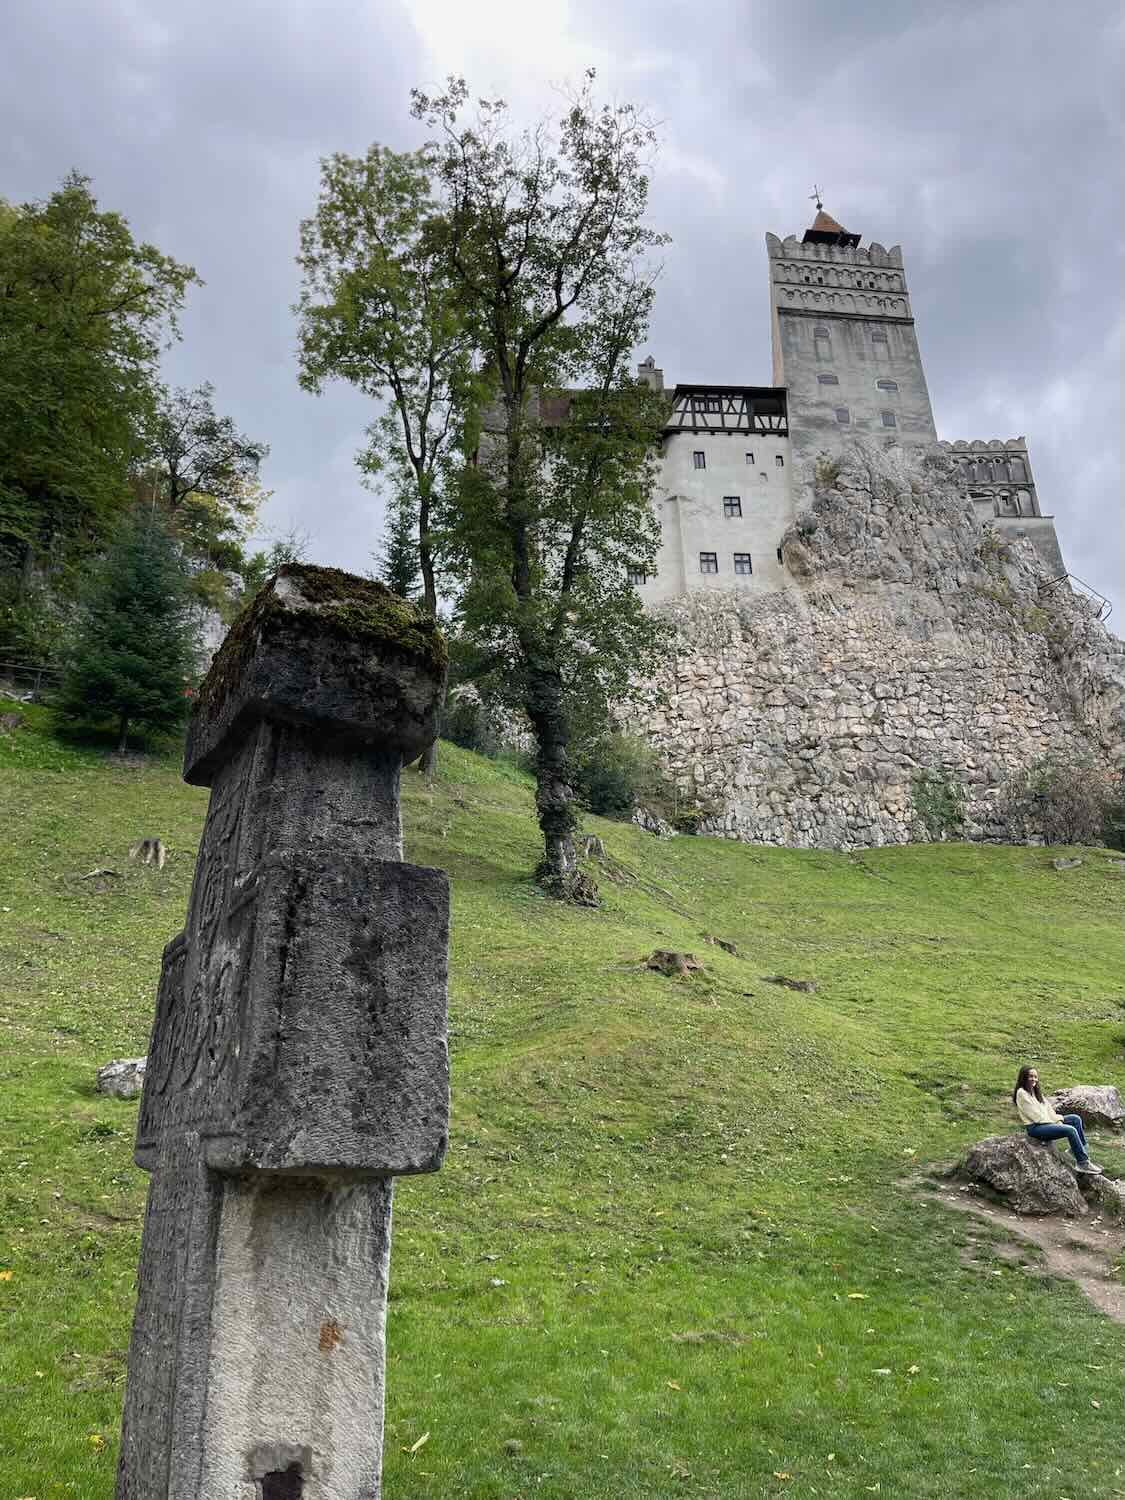 Imposing view of Bran Castle perched on a rocky outcrop against an overcast sky, with a stone cross monument in the foreground and trees surrounding the scene, capturing the castle's majestic and mysterious ambiance